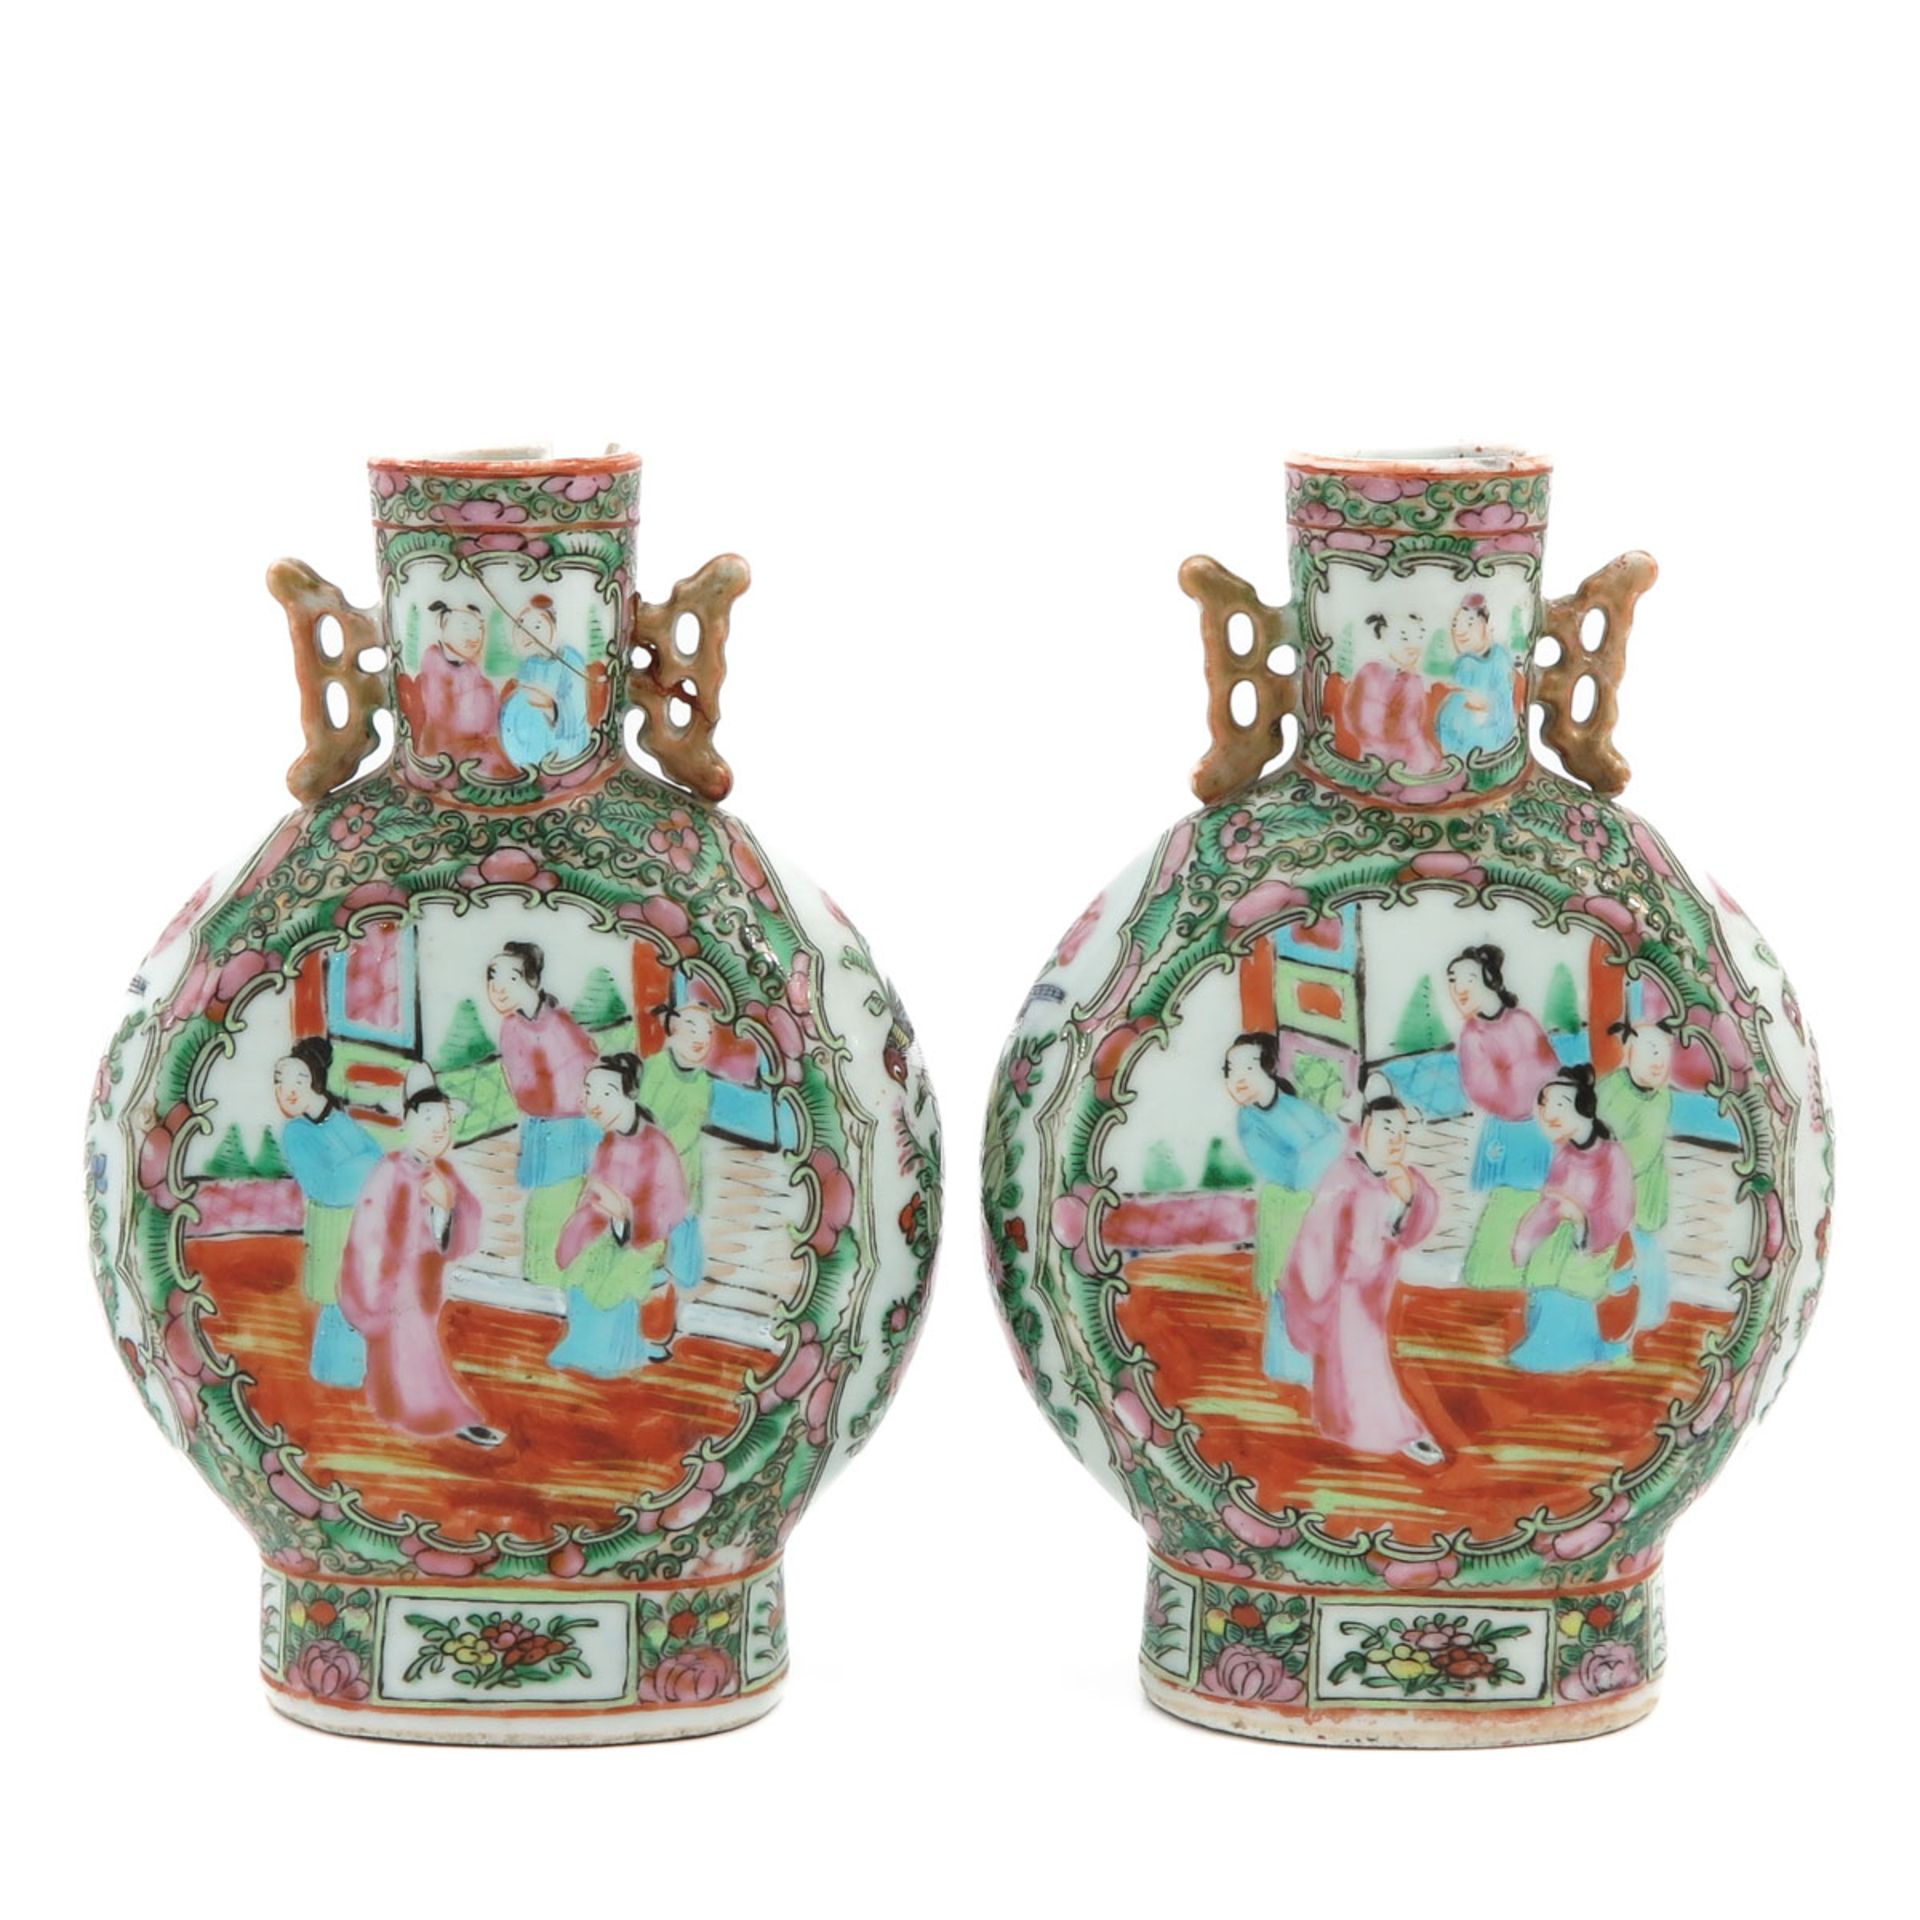 A Pair of Cantonese Moon Bottle Vases